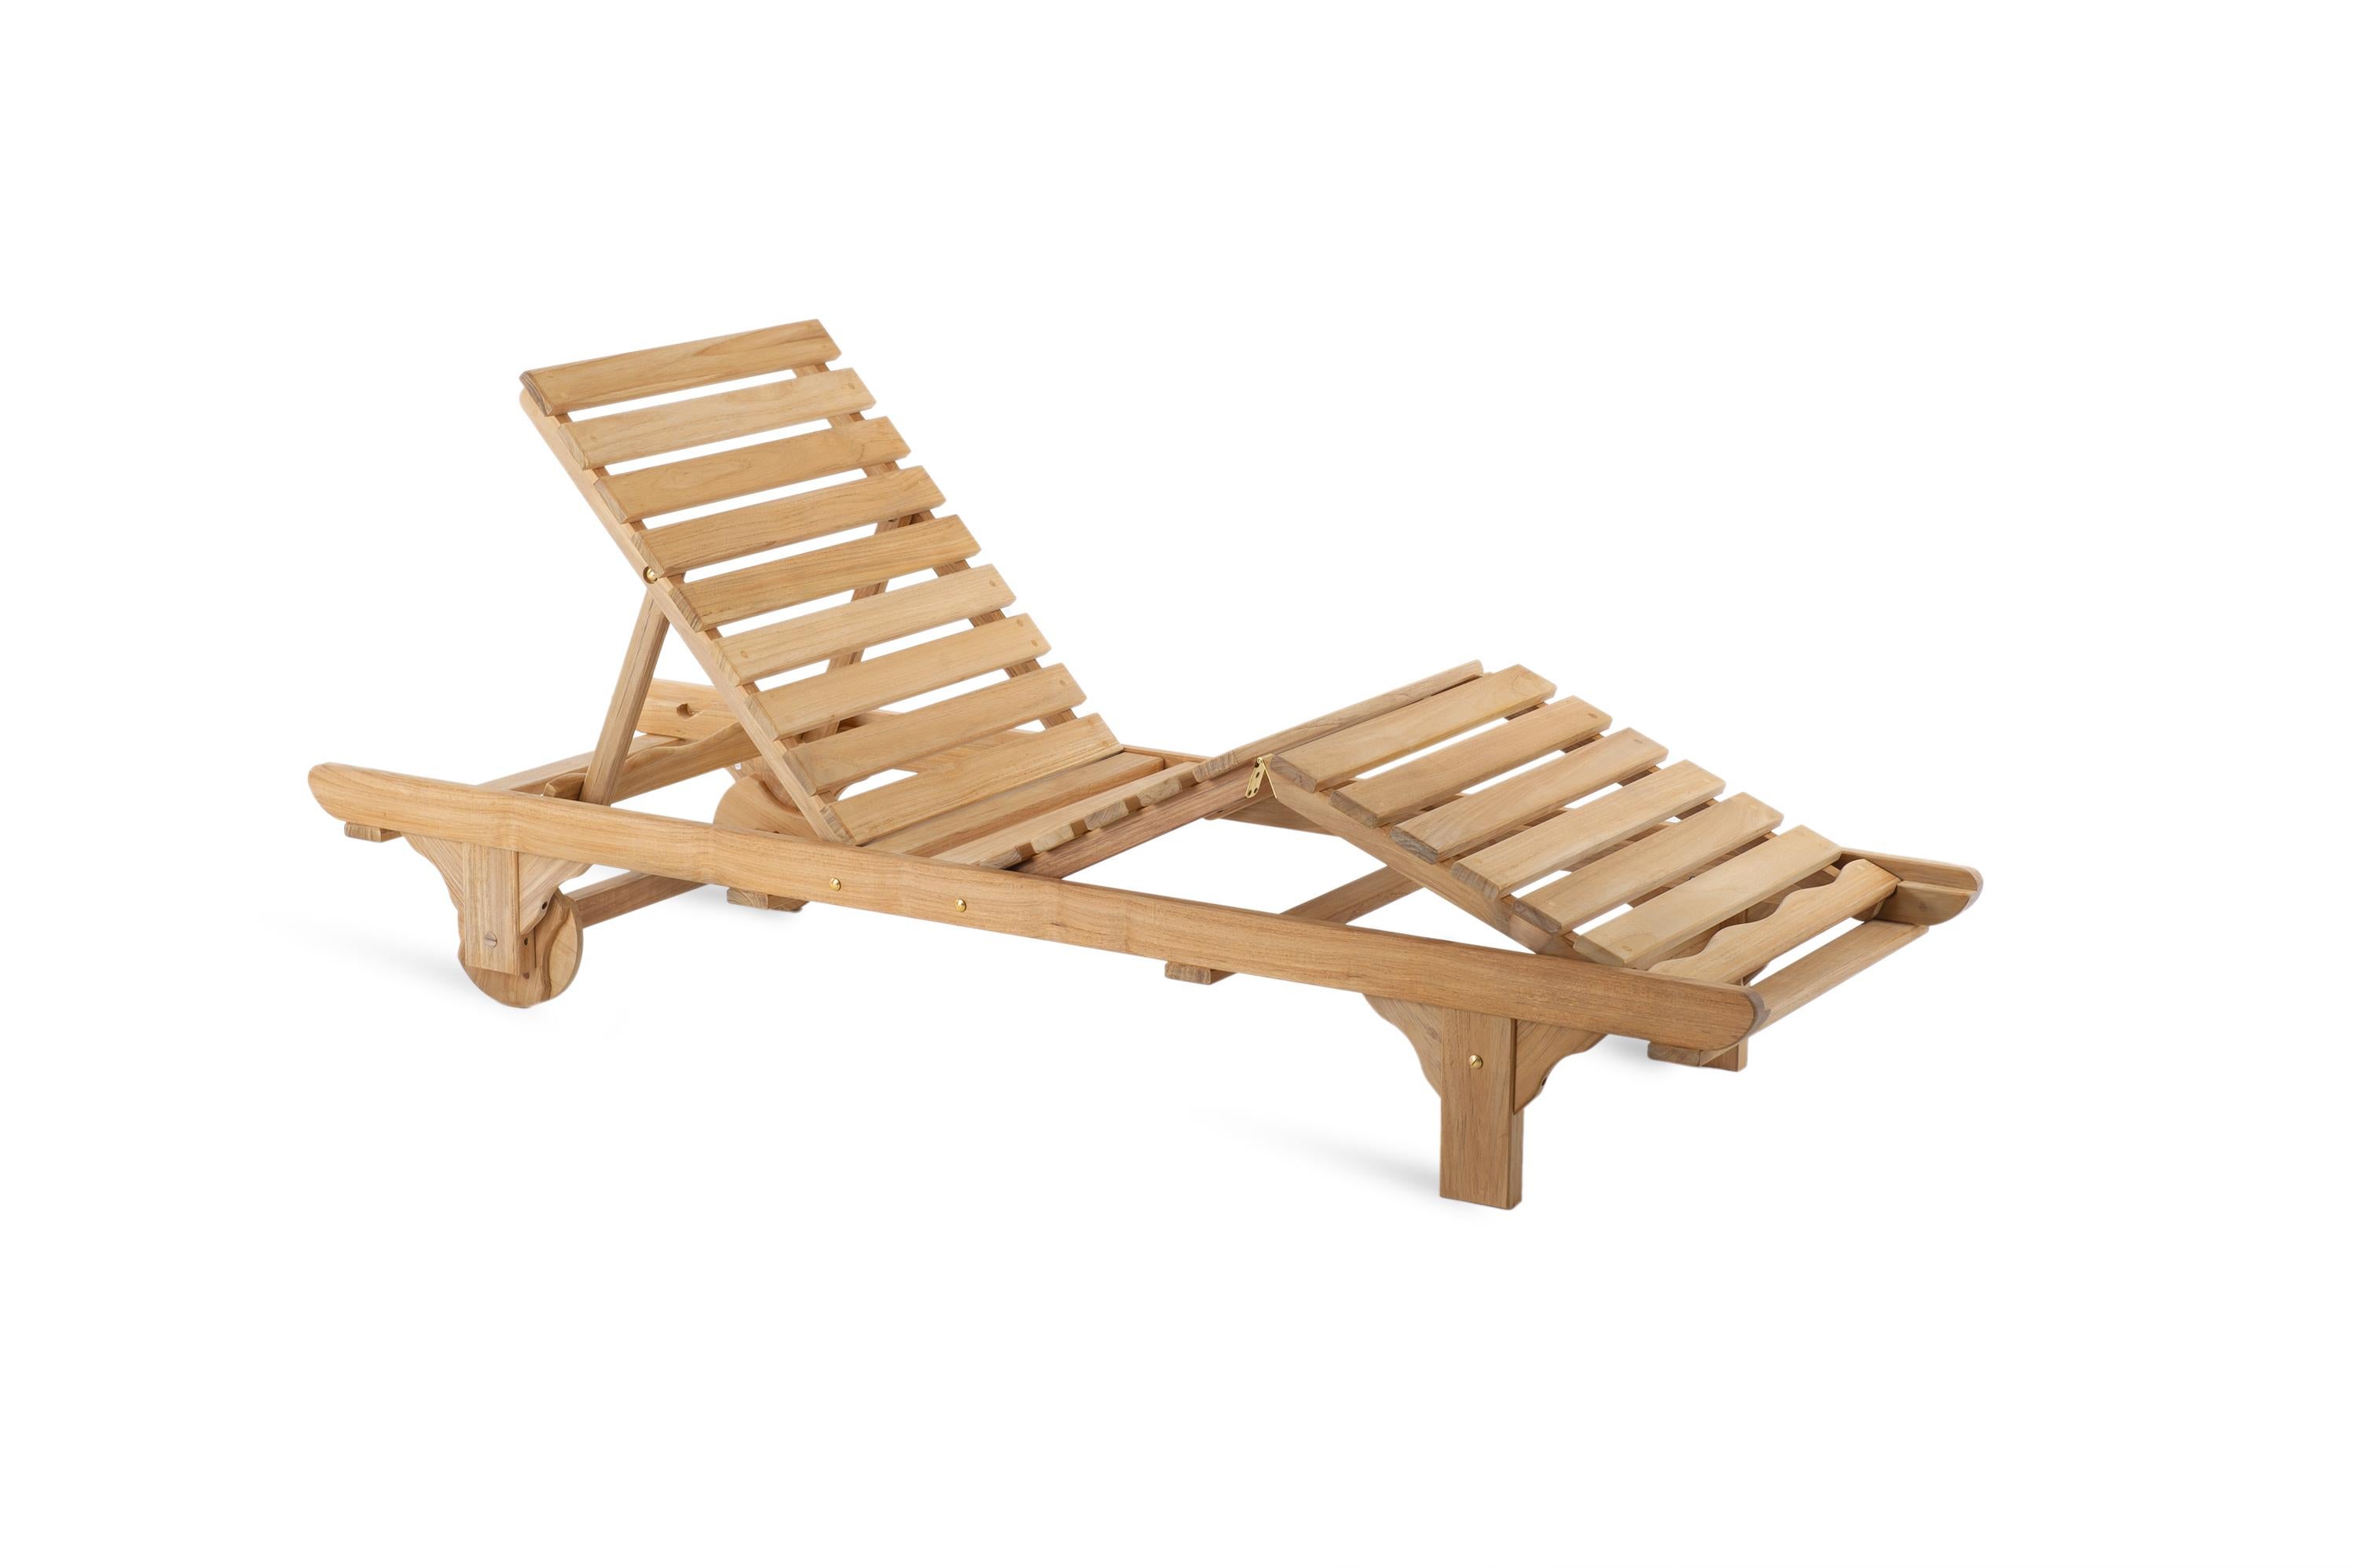 Italian Unopiu' Chelsea Sunlounger Outdoor Collection For Sale